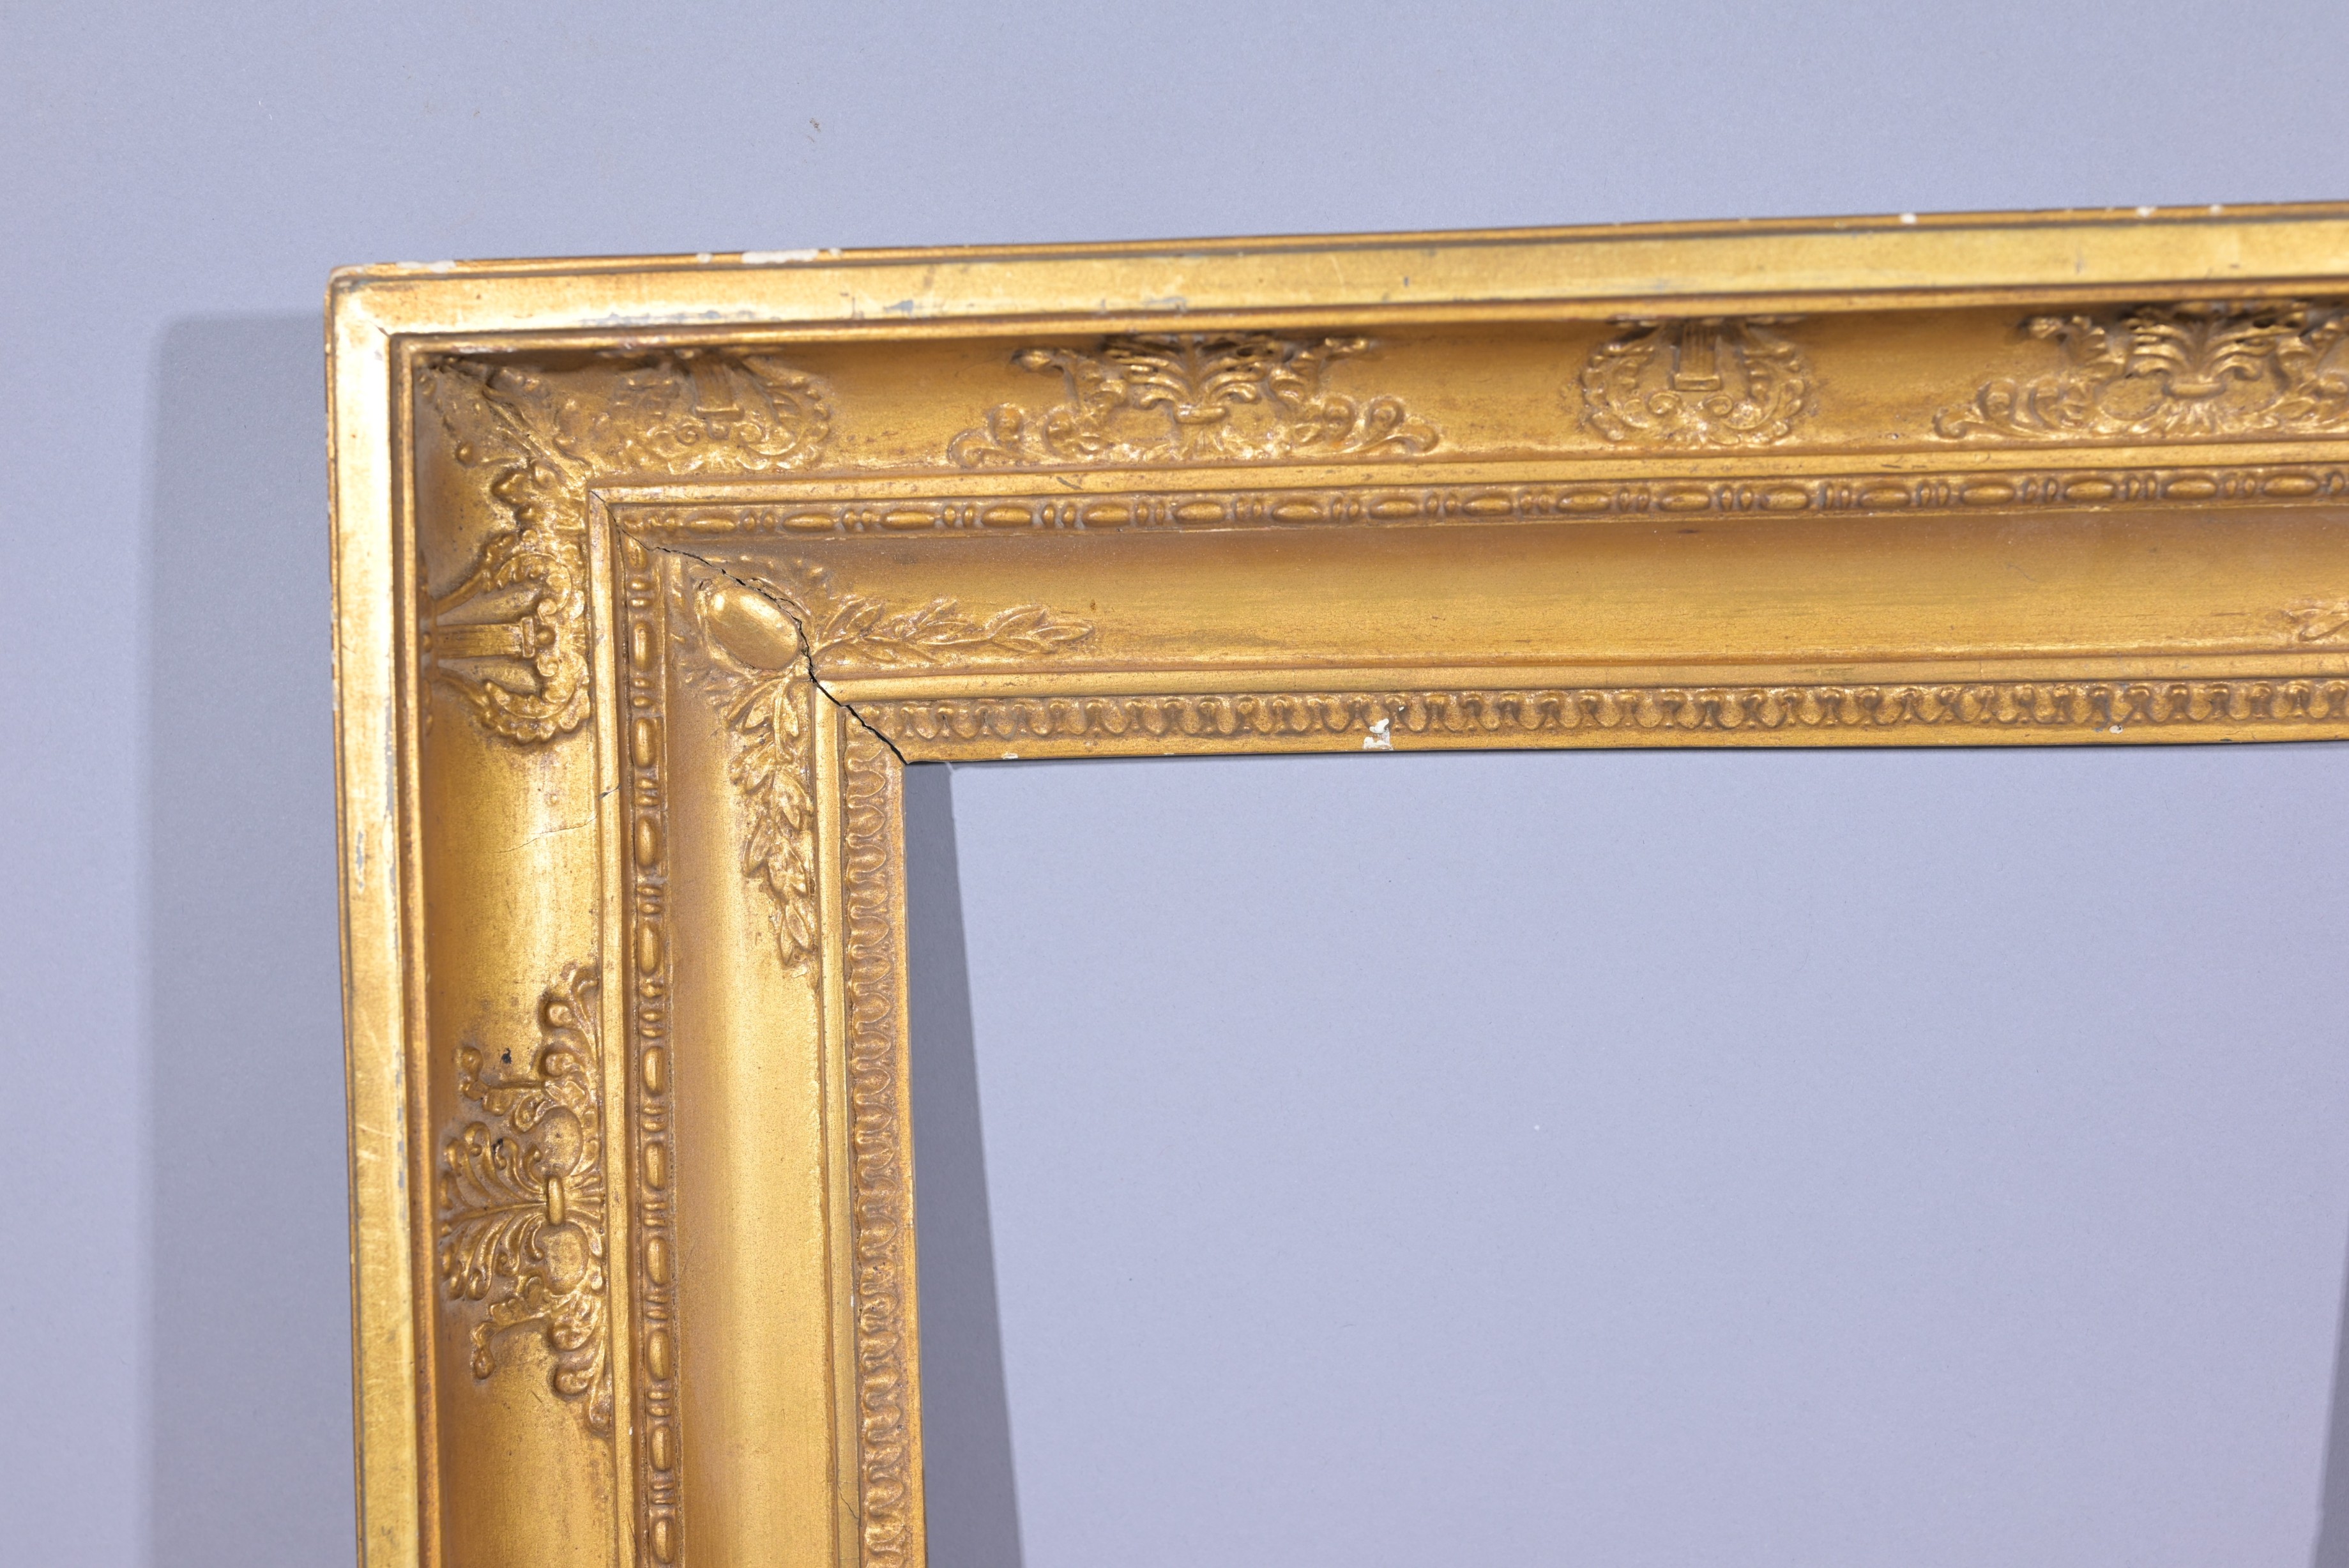 Ameican Gilt/Wood Frame- 16 x 13 - Image 2 of 7